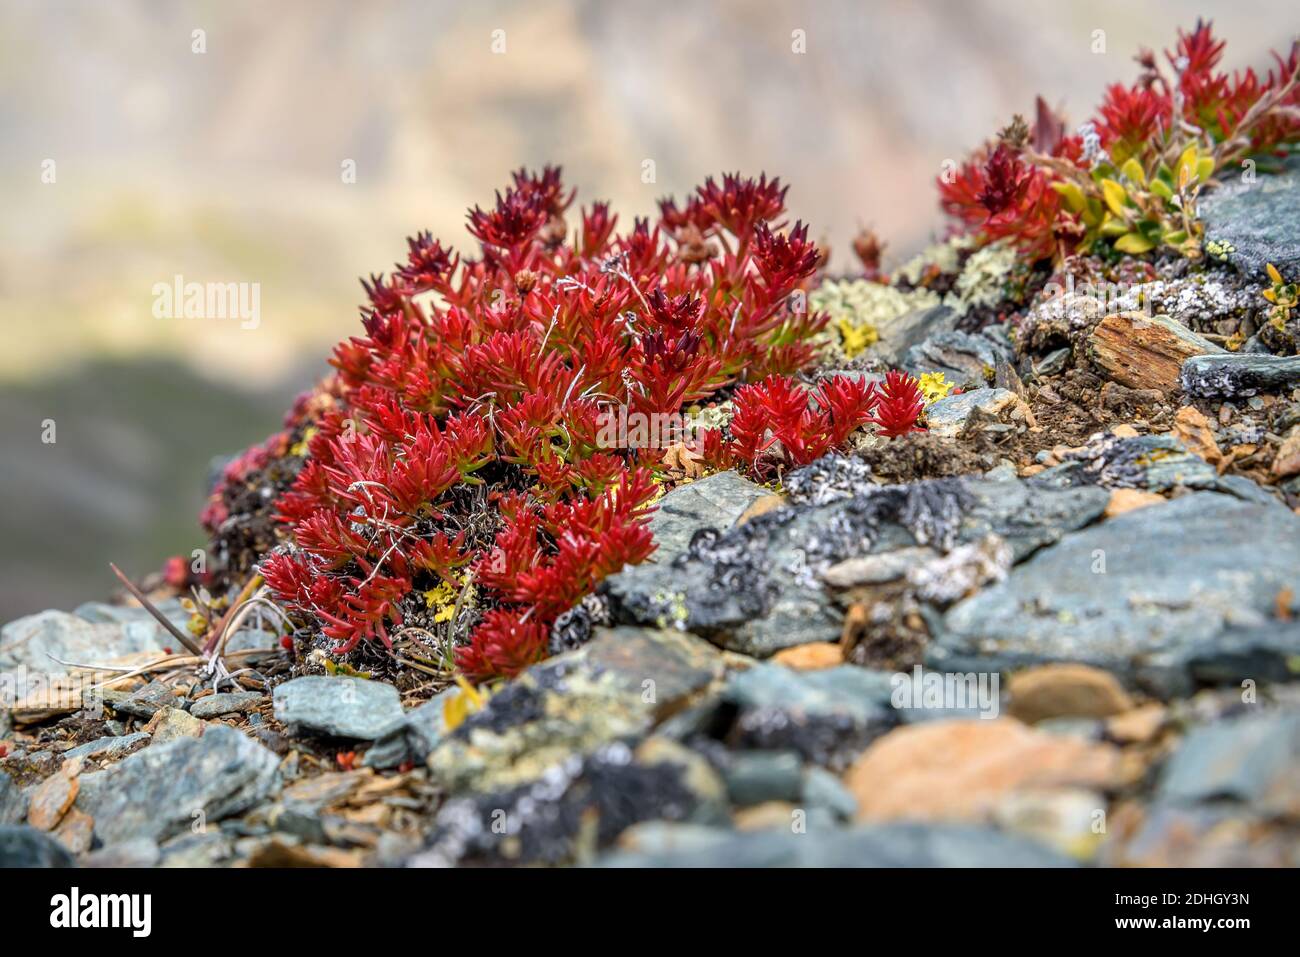 Beautiful floral background with red exotic flowers rhodiola (Rhodiola quadrifida) close-up on stones high in the mountains Stock Photo